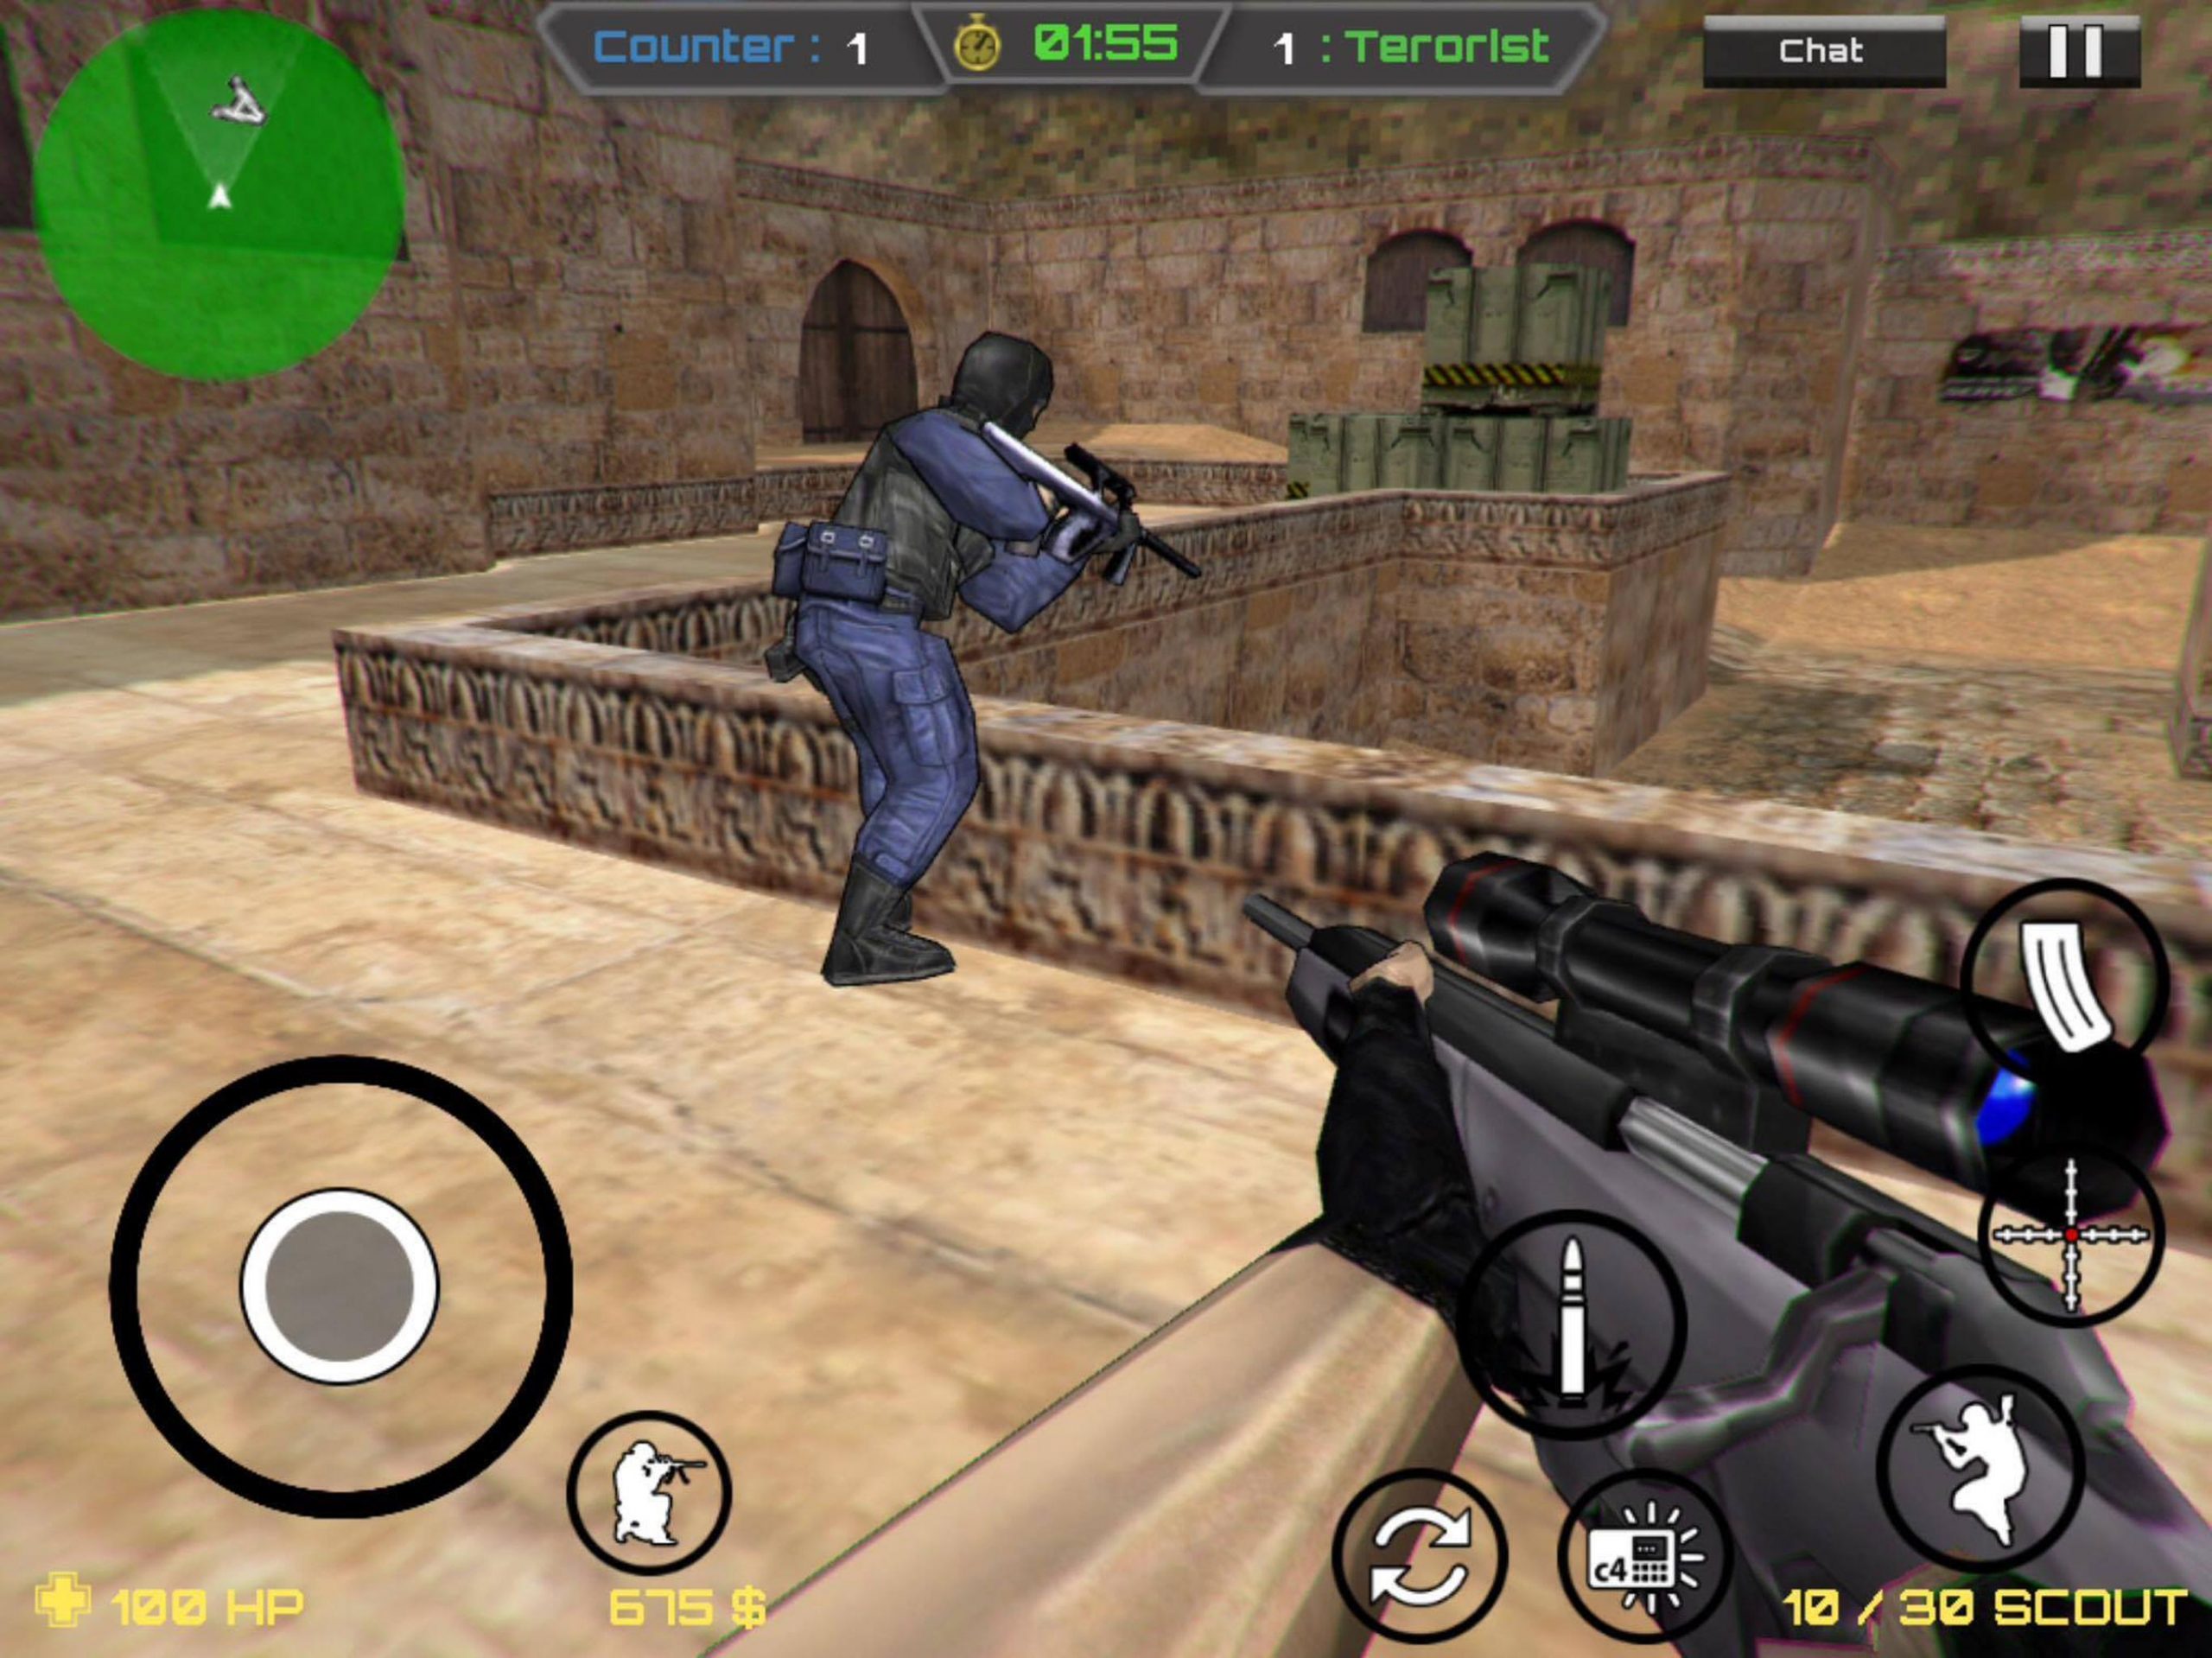 counter attack multiplayer fps